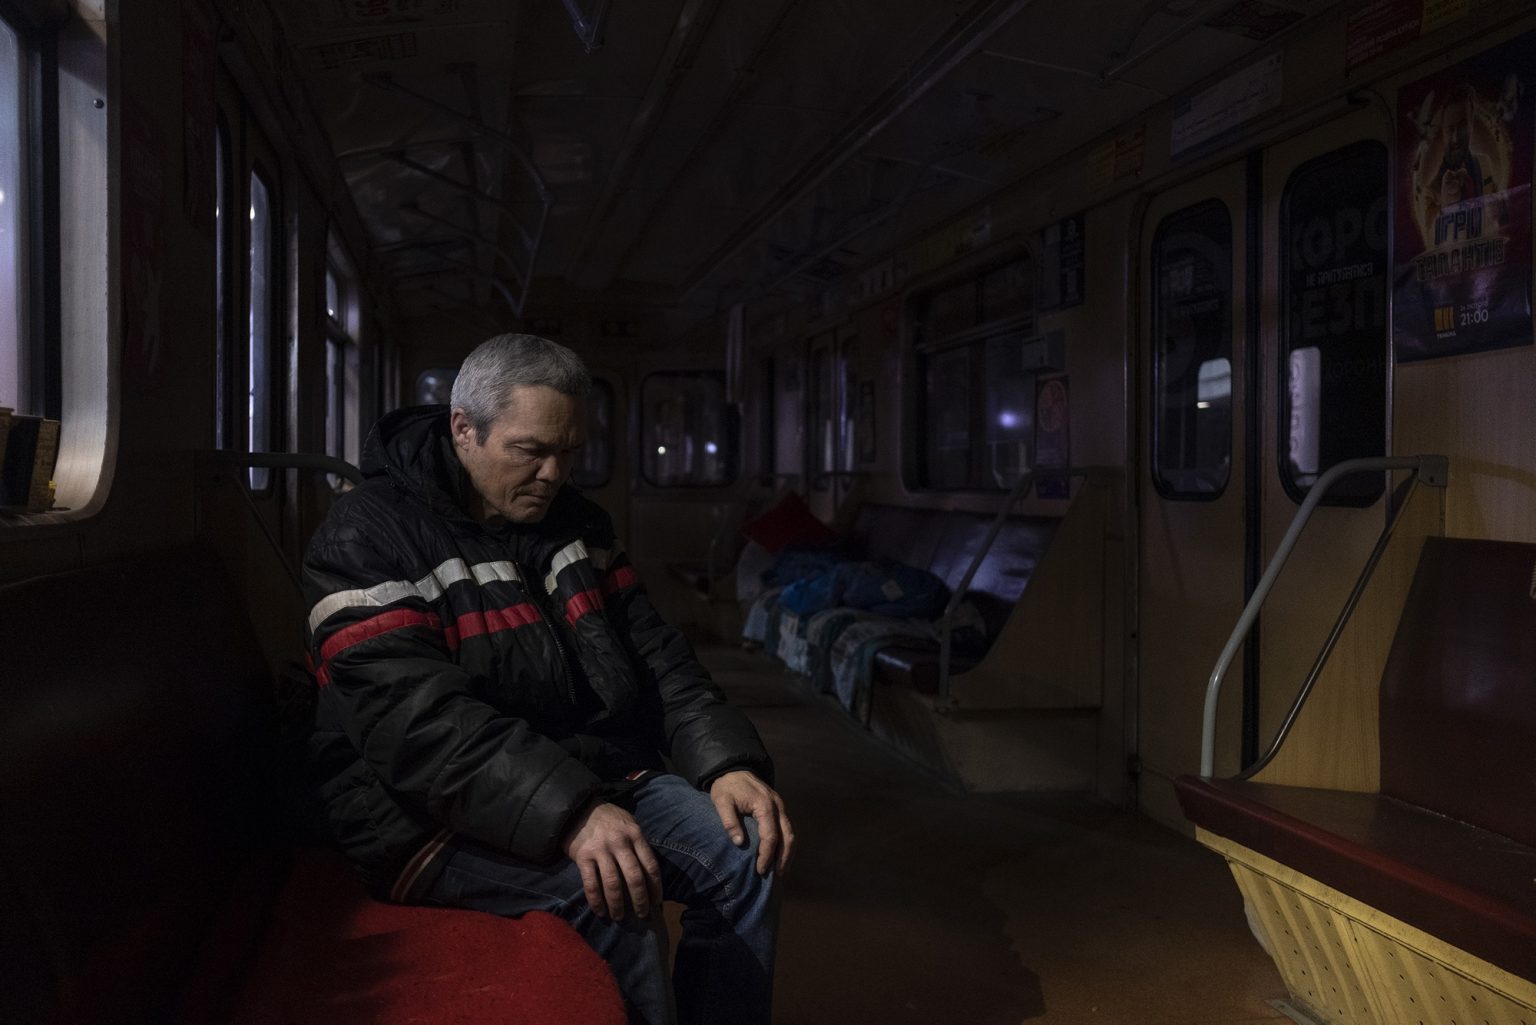 01559748 Kharkiv, Ukraine - March 27th 2022 - Valery, 53, a supermarket employee, He has been living in a subway carriage for a month and because of the war he is separated from his family who took refuge in another station.
Ph.Giulio Piscitelli                      As Russia invades Ukraine, thousands of Ukrainians are fleeing the country to find shelter in bordering countries.
---------
Con l'invasione russa ai danni dell'Ucraina, migliaia di ucraini sono in fuga dalla nazione d'origine per cercare rifugio nelle nazioni confinanti. *** SPECIAL   FEE   APPLIES *** *** Local Caption *** 01559748